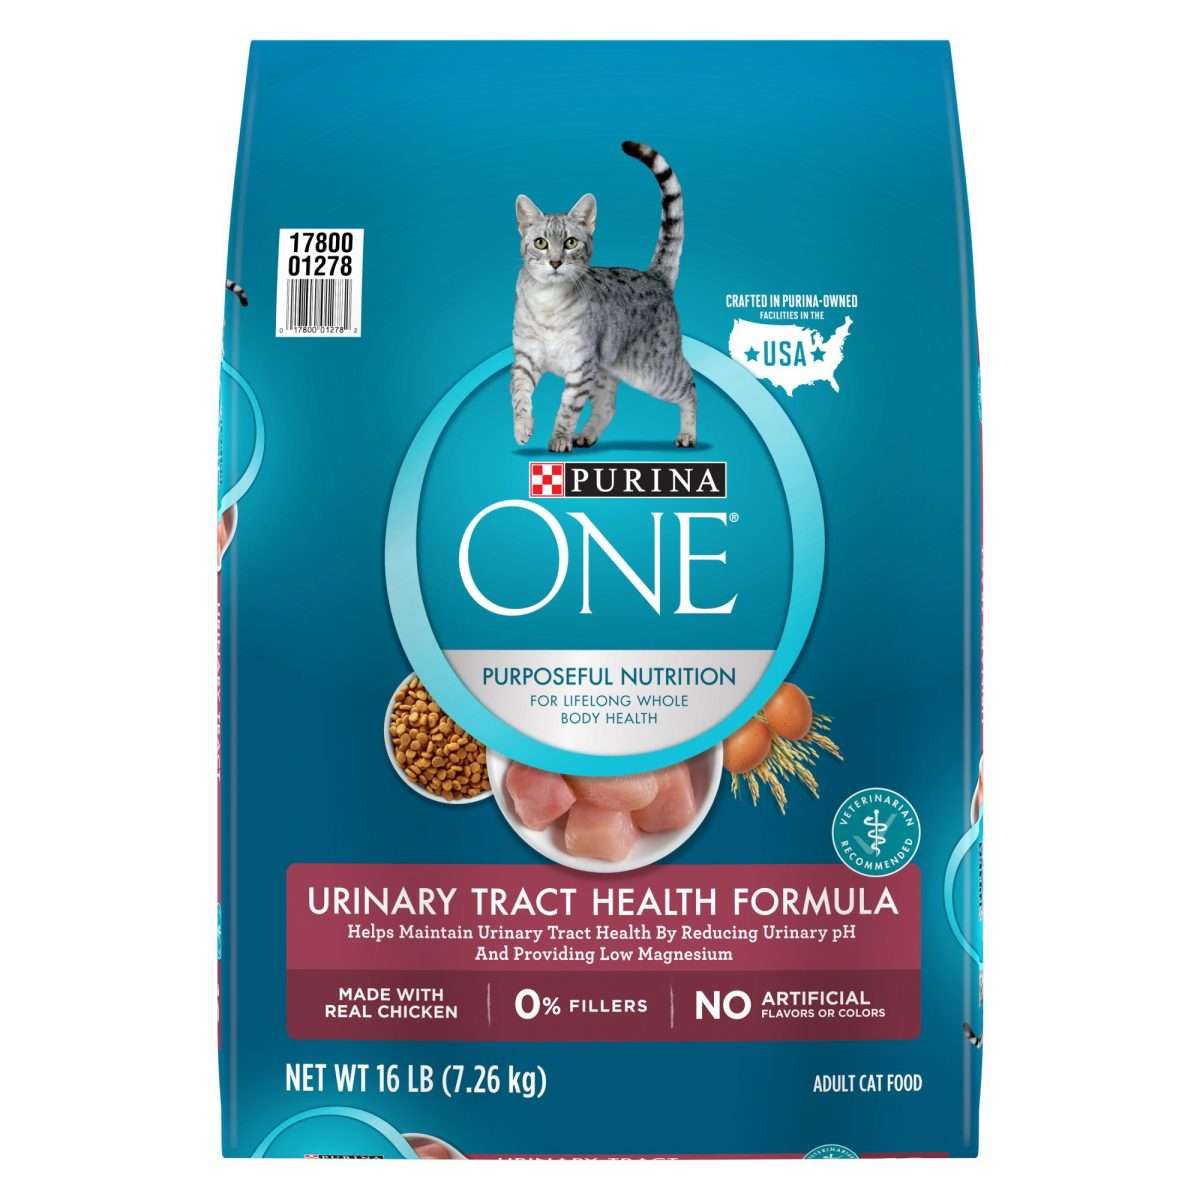 Purina ONE Special Care Urinary Tract Health Formula Cat Food